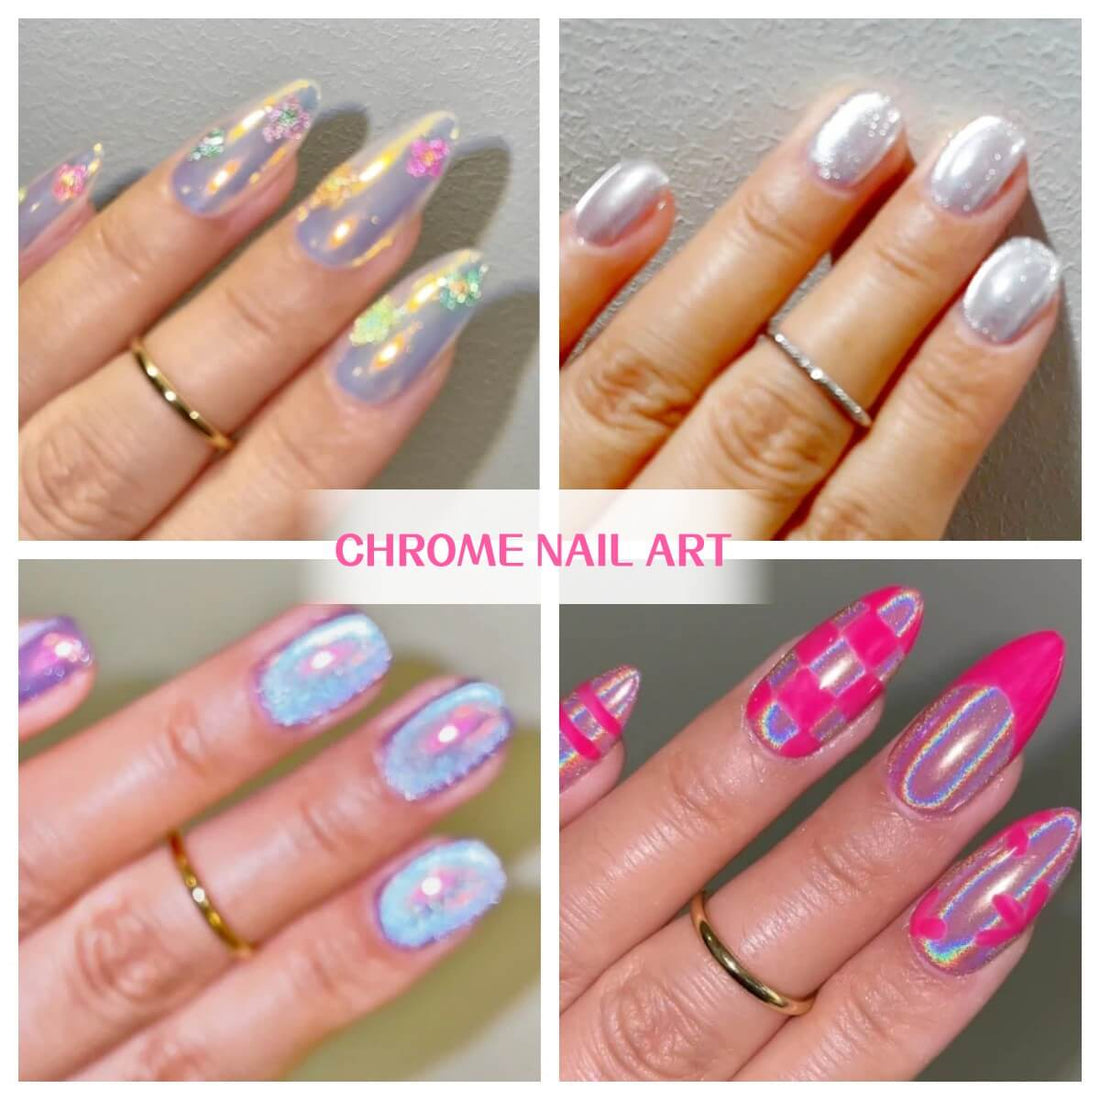 "Chrome Nails" Is the Perfect Manicure Trend To Revamp Your Summer Nails